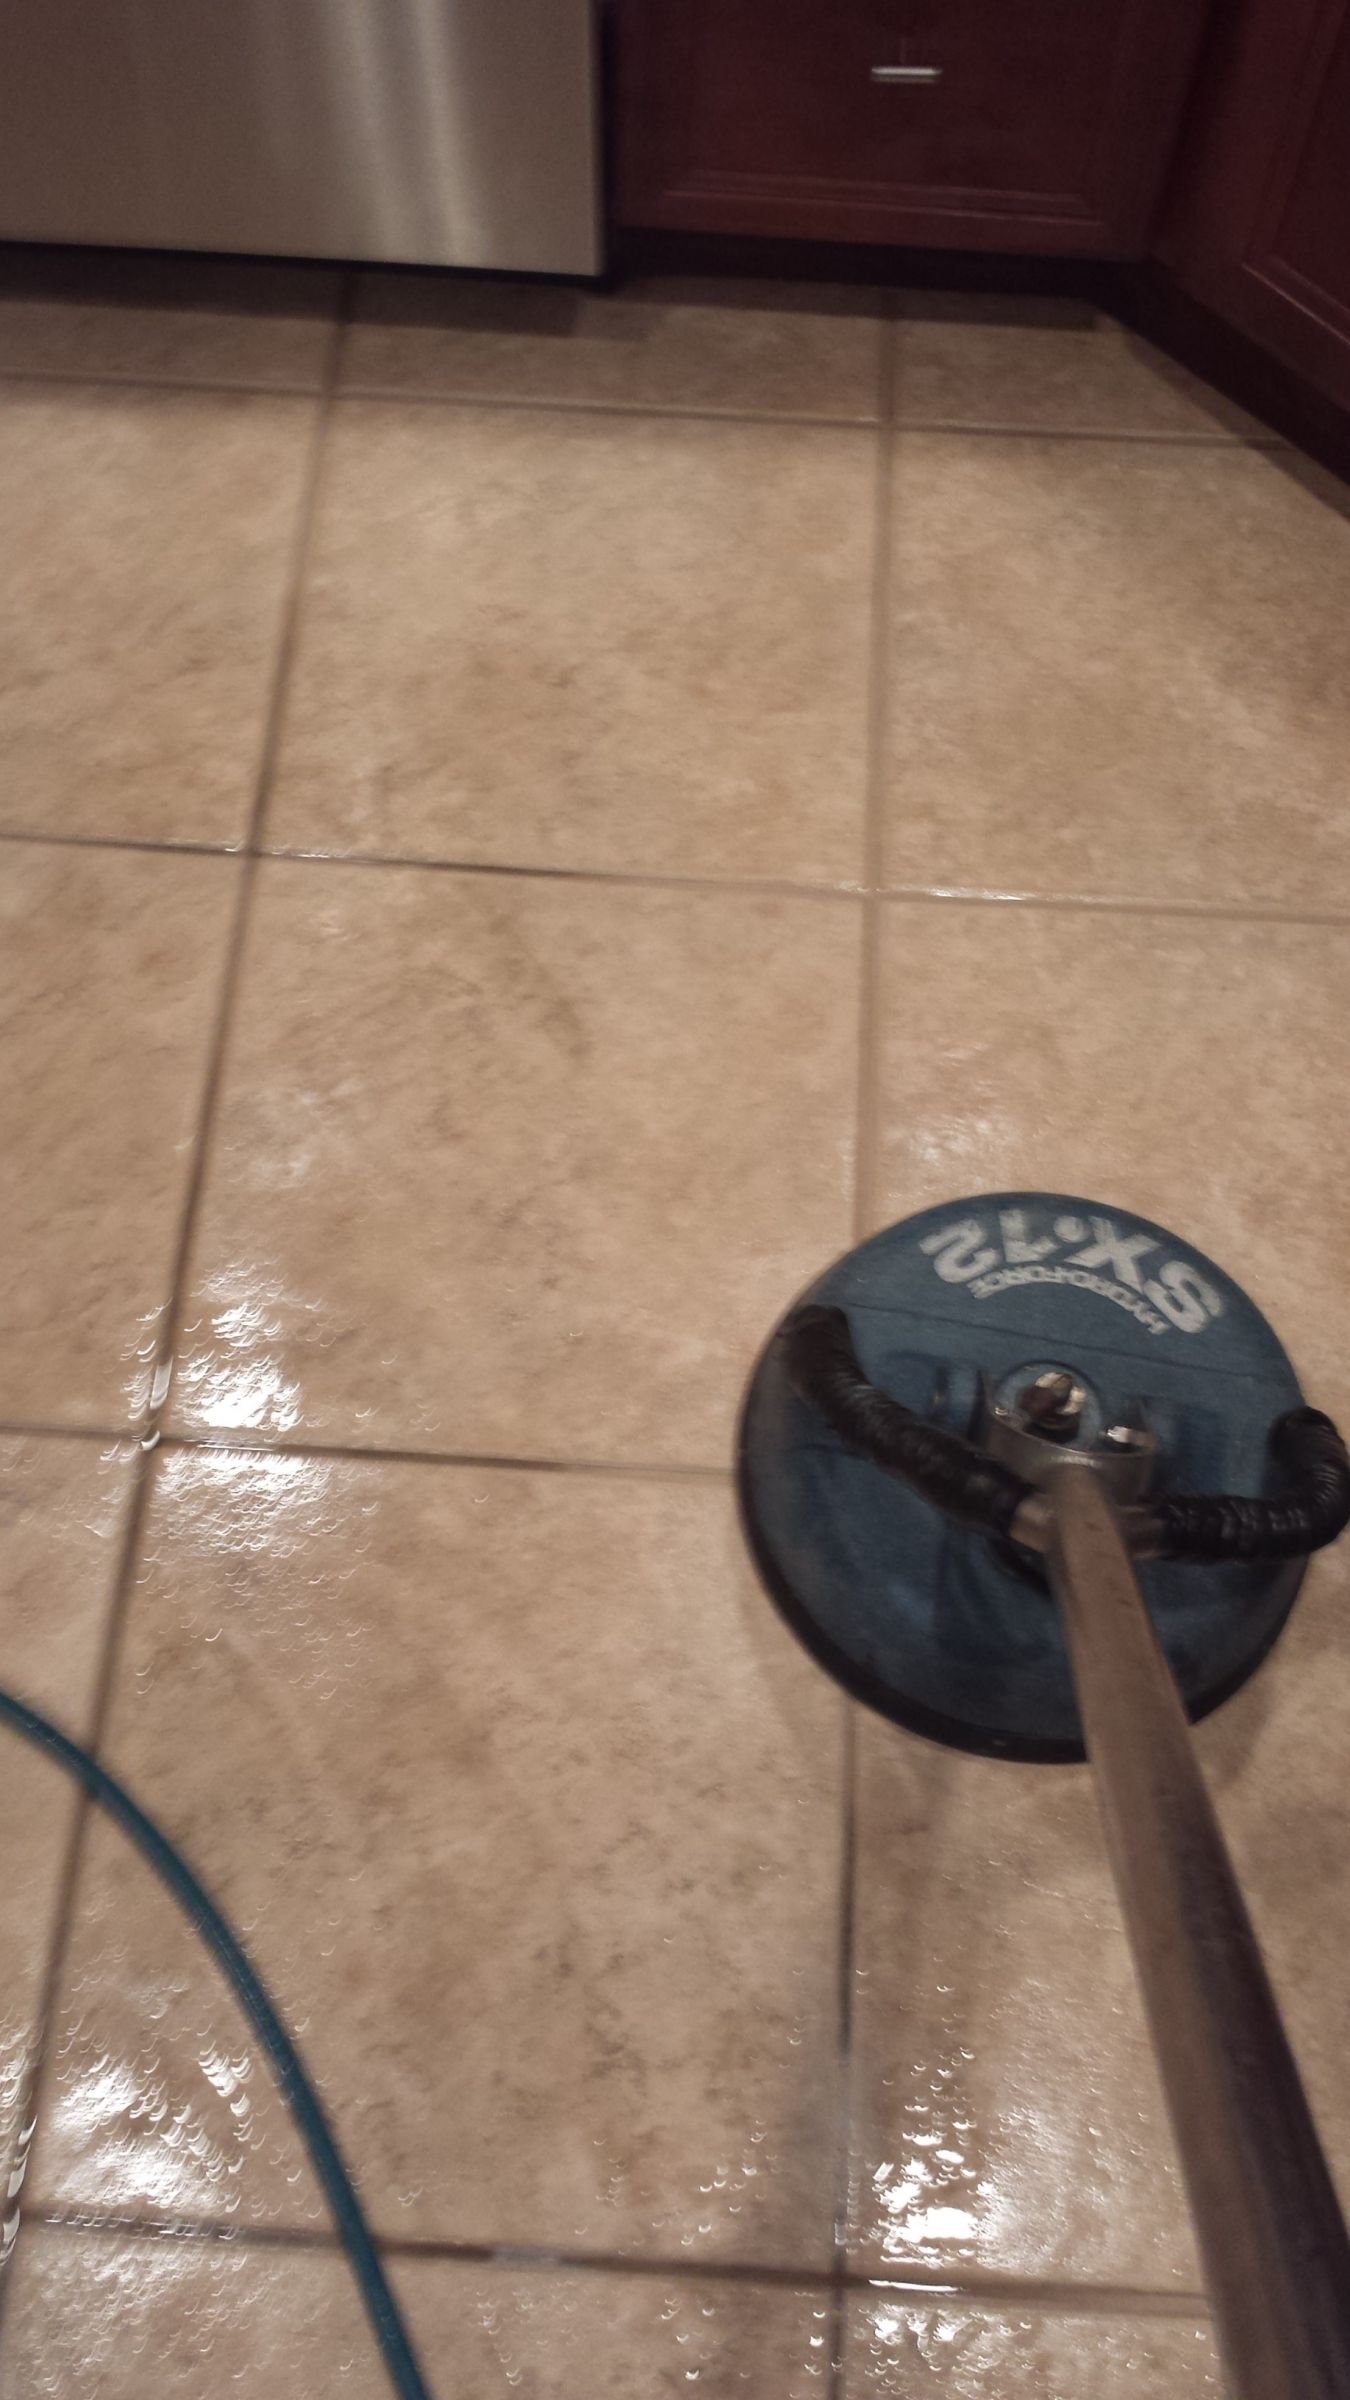 Get Help With Expert Blackwood Tile and Grout Cleaning